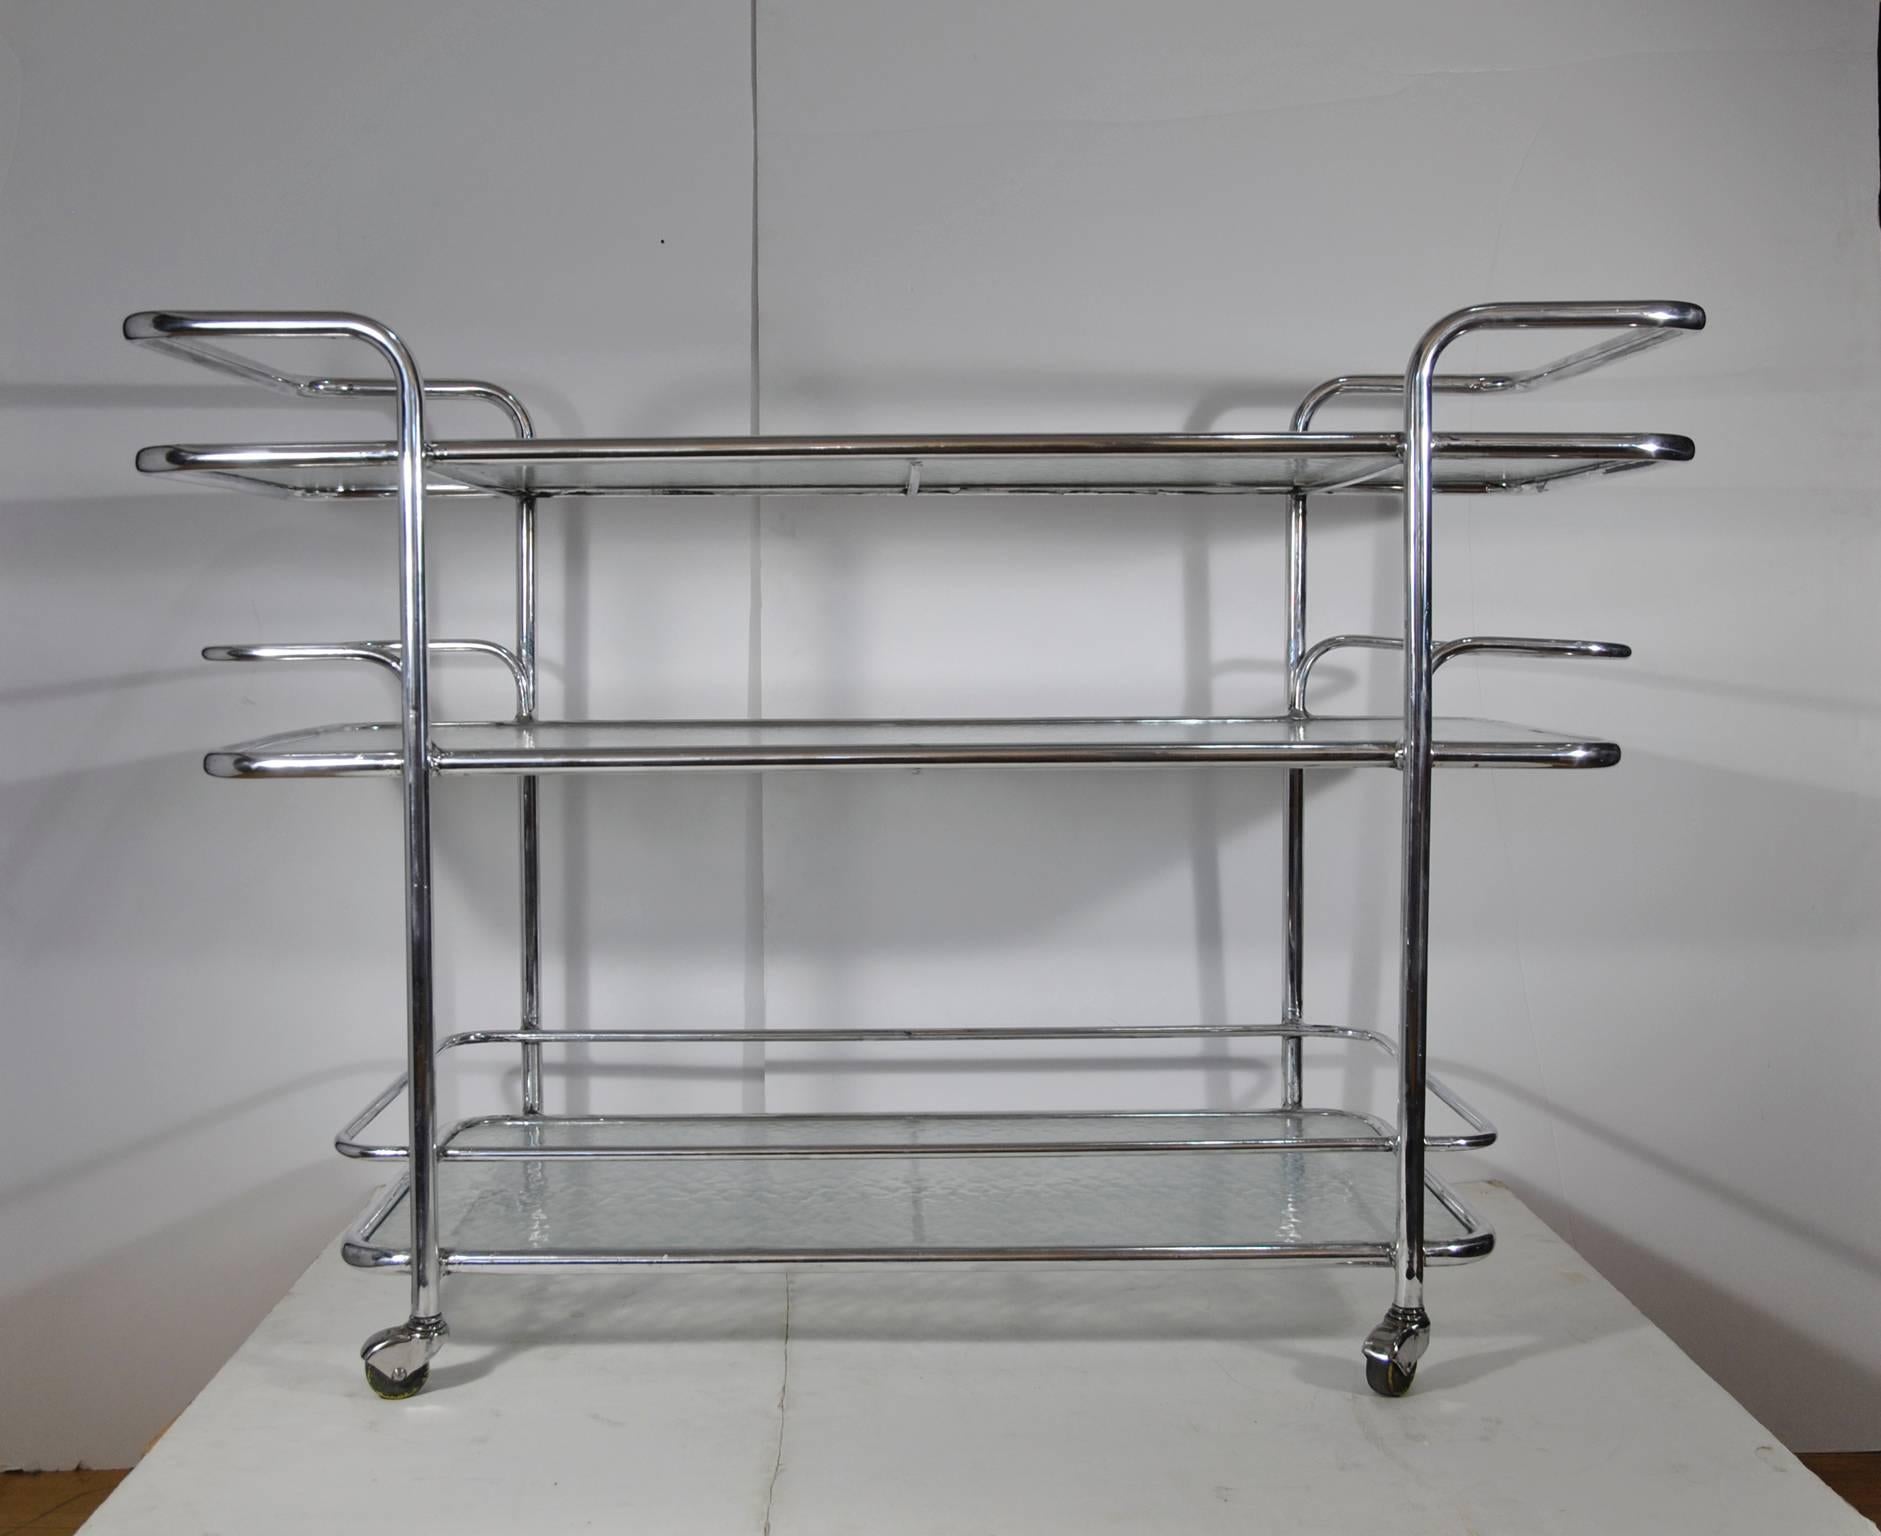 Serving cart designed by Tadao E Inouyer in 1956 and made by Brown Jordan.
Winning prize in 1960 Pasadena Art Museum.
Please feel free to contact us directly for best pricing and shipping options.